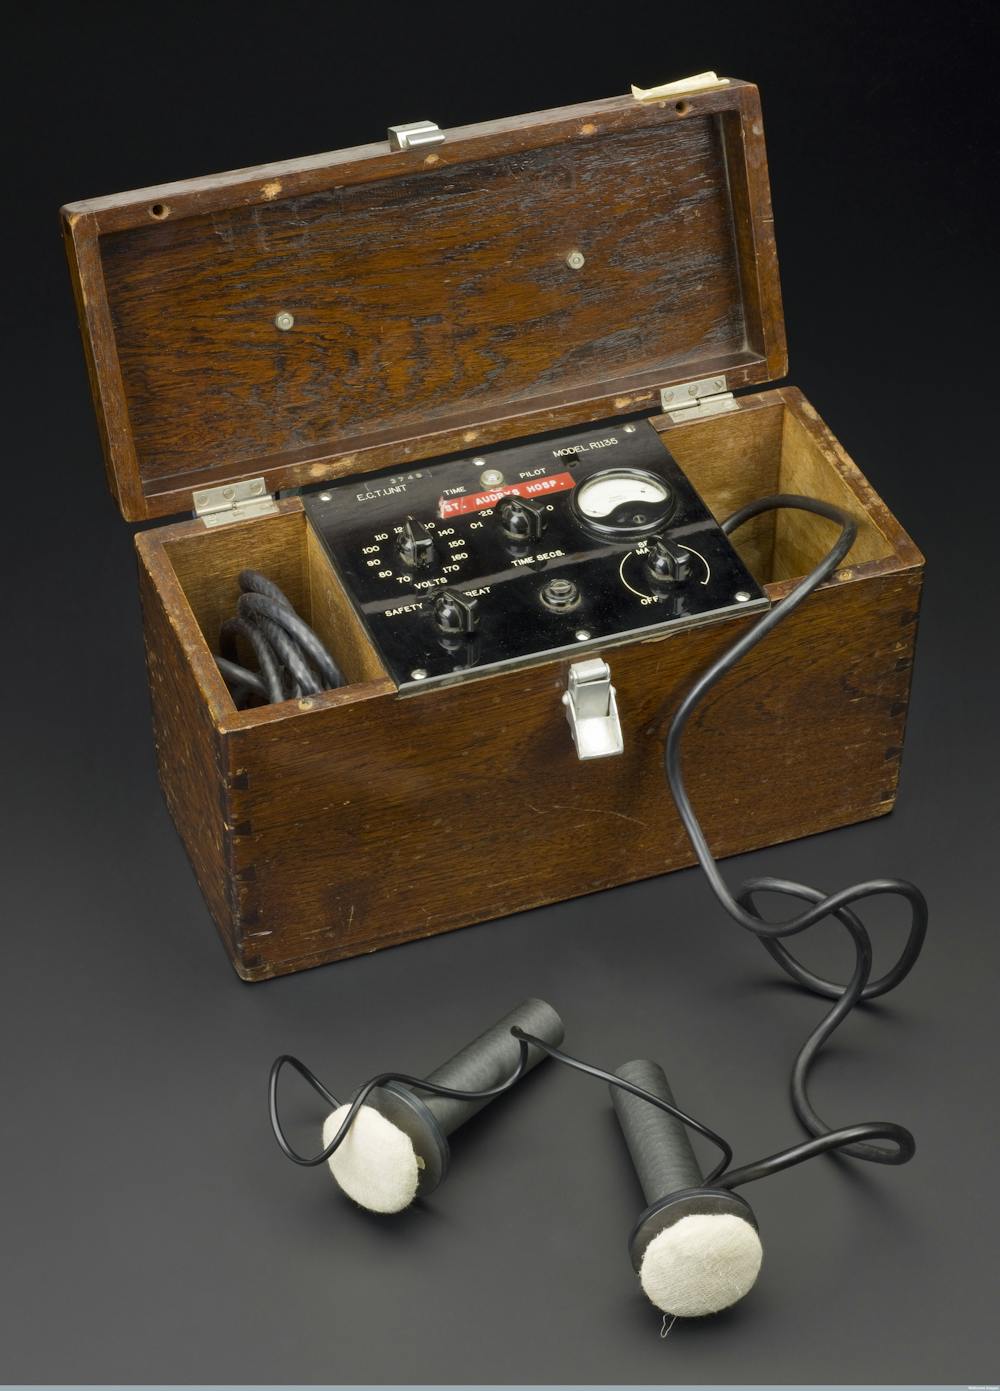 Electroconvulsive therapy: A history of controversy, but also of help